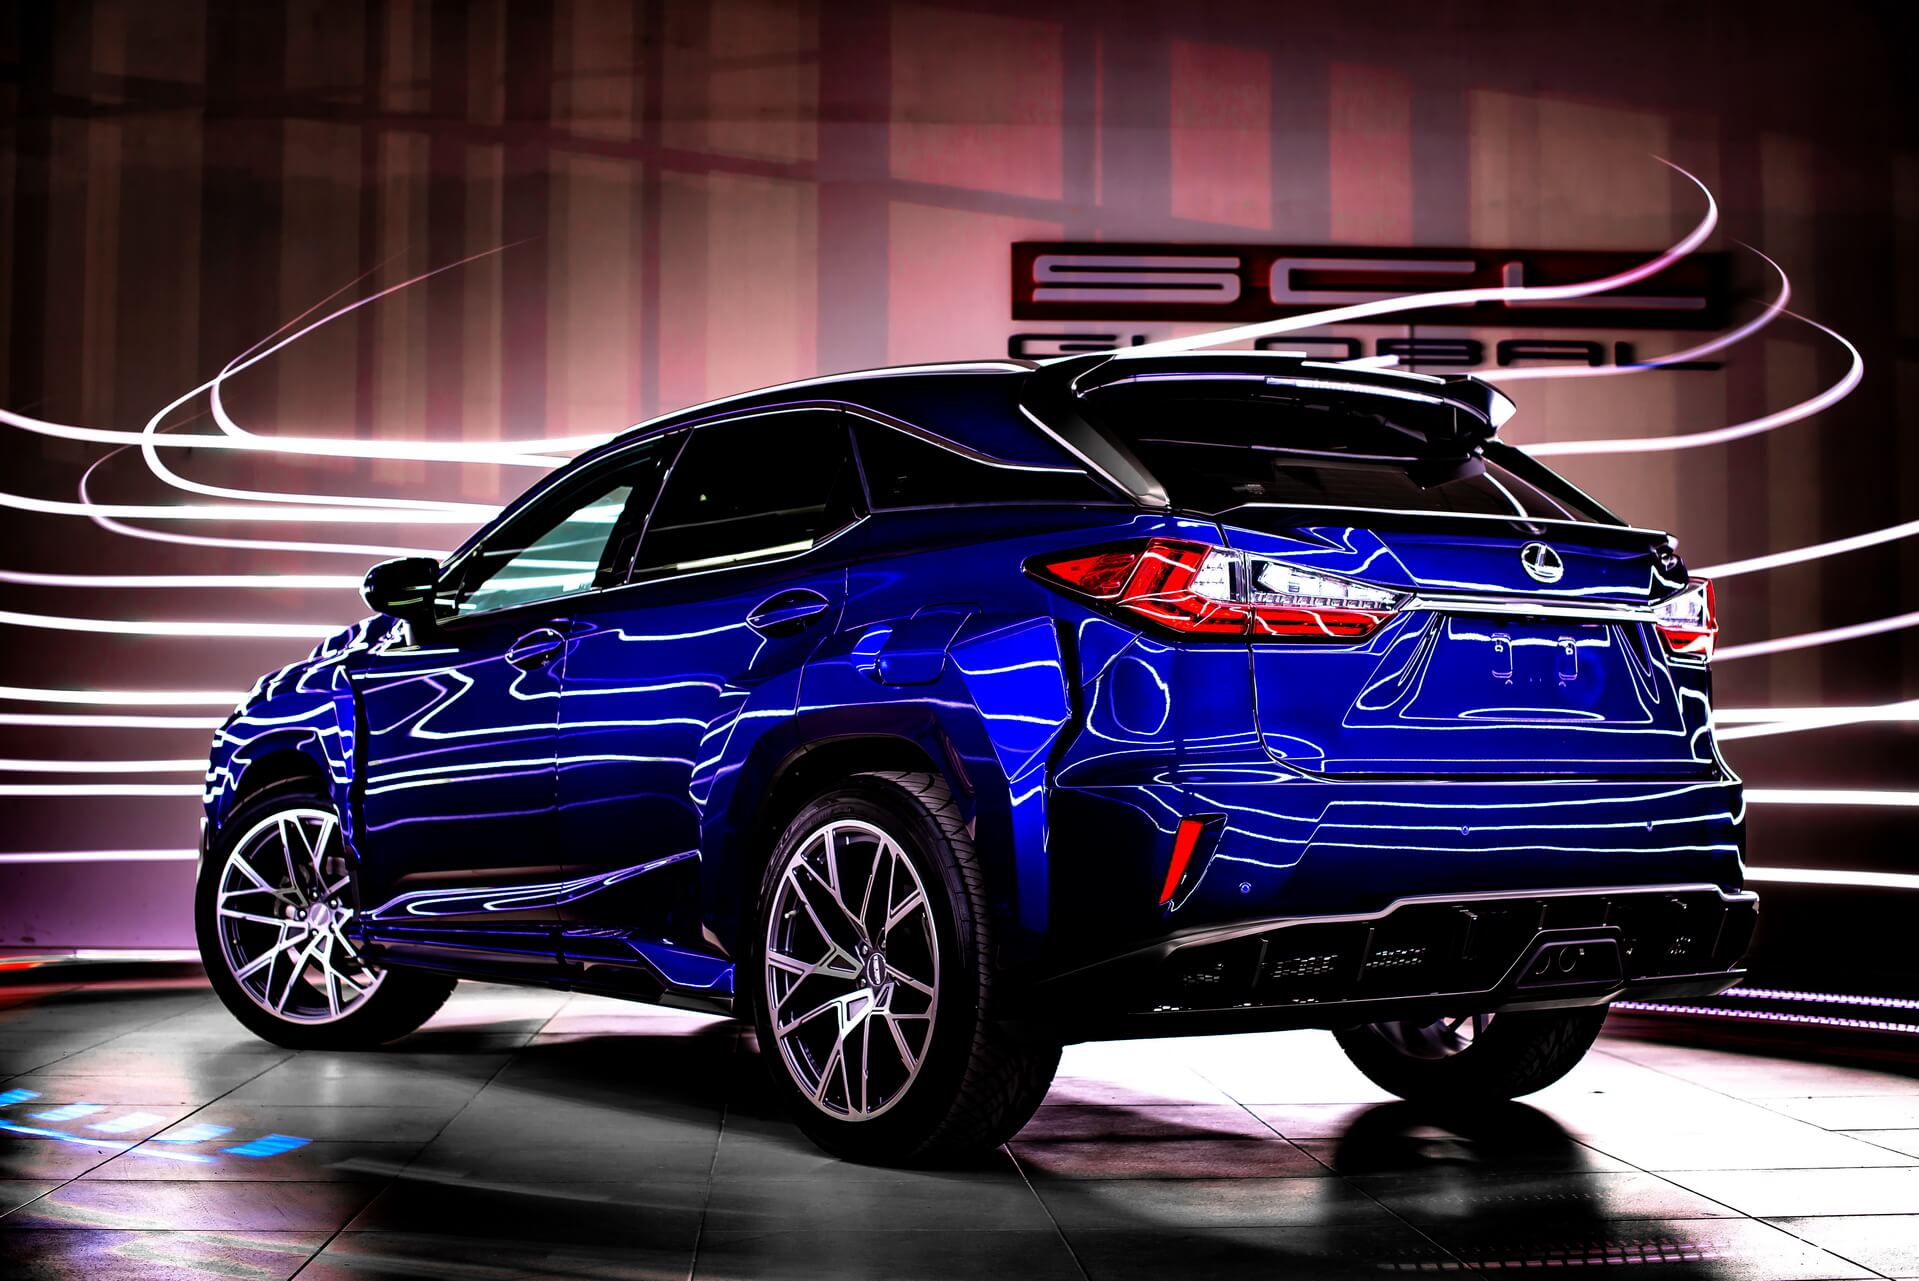 Check our price and buy an SCL Performance body kit for Lexus RX Goemon!